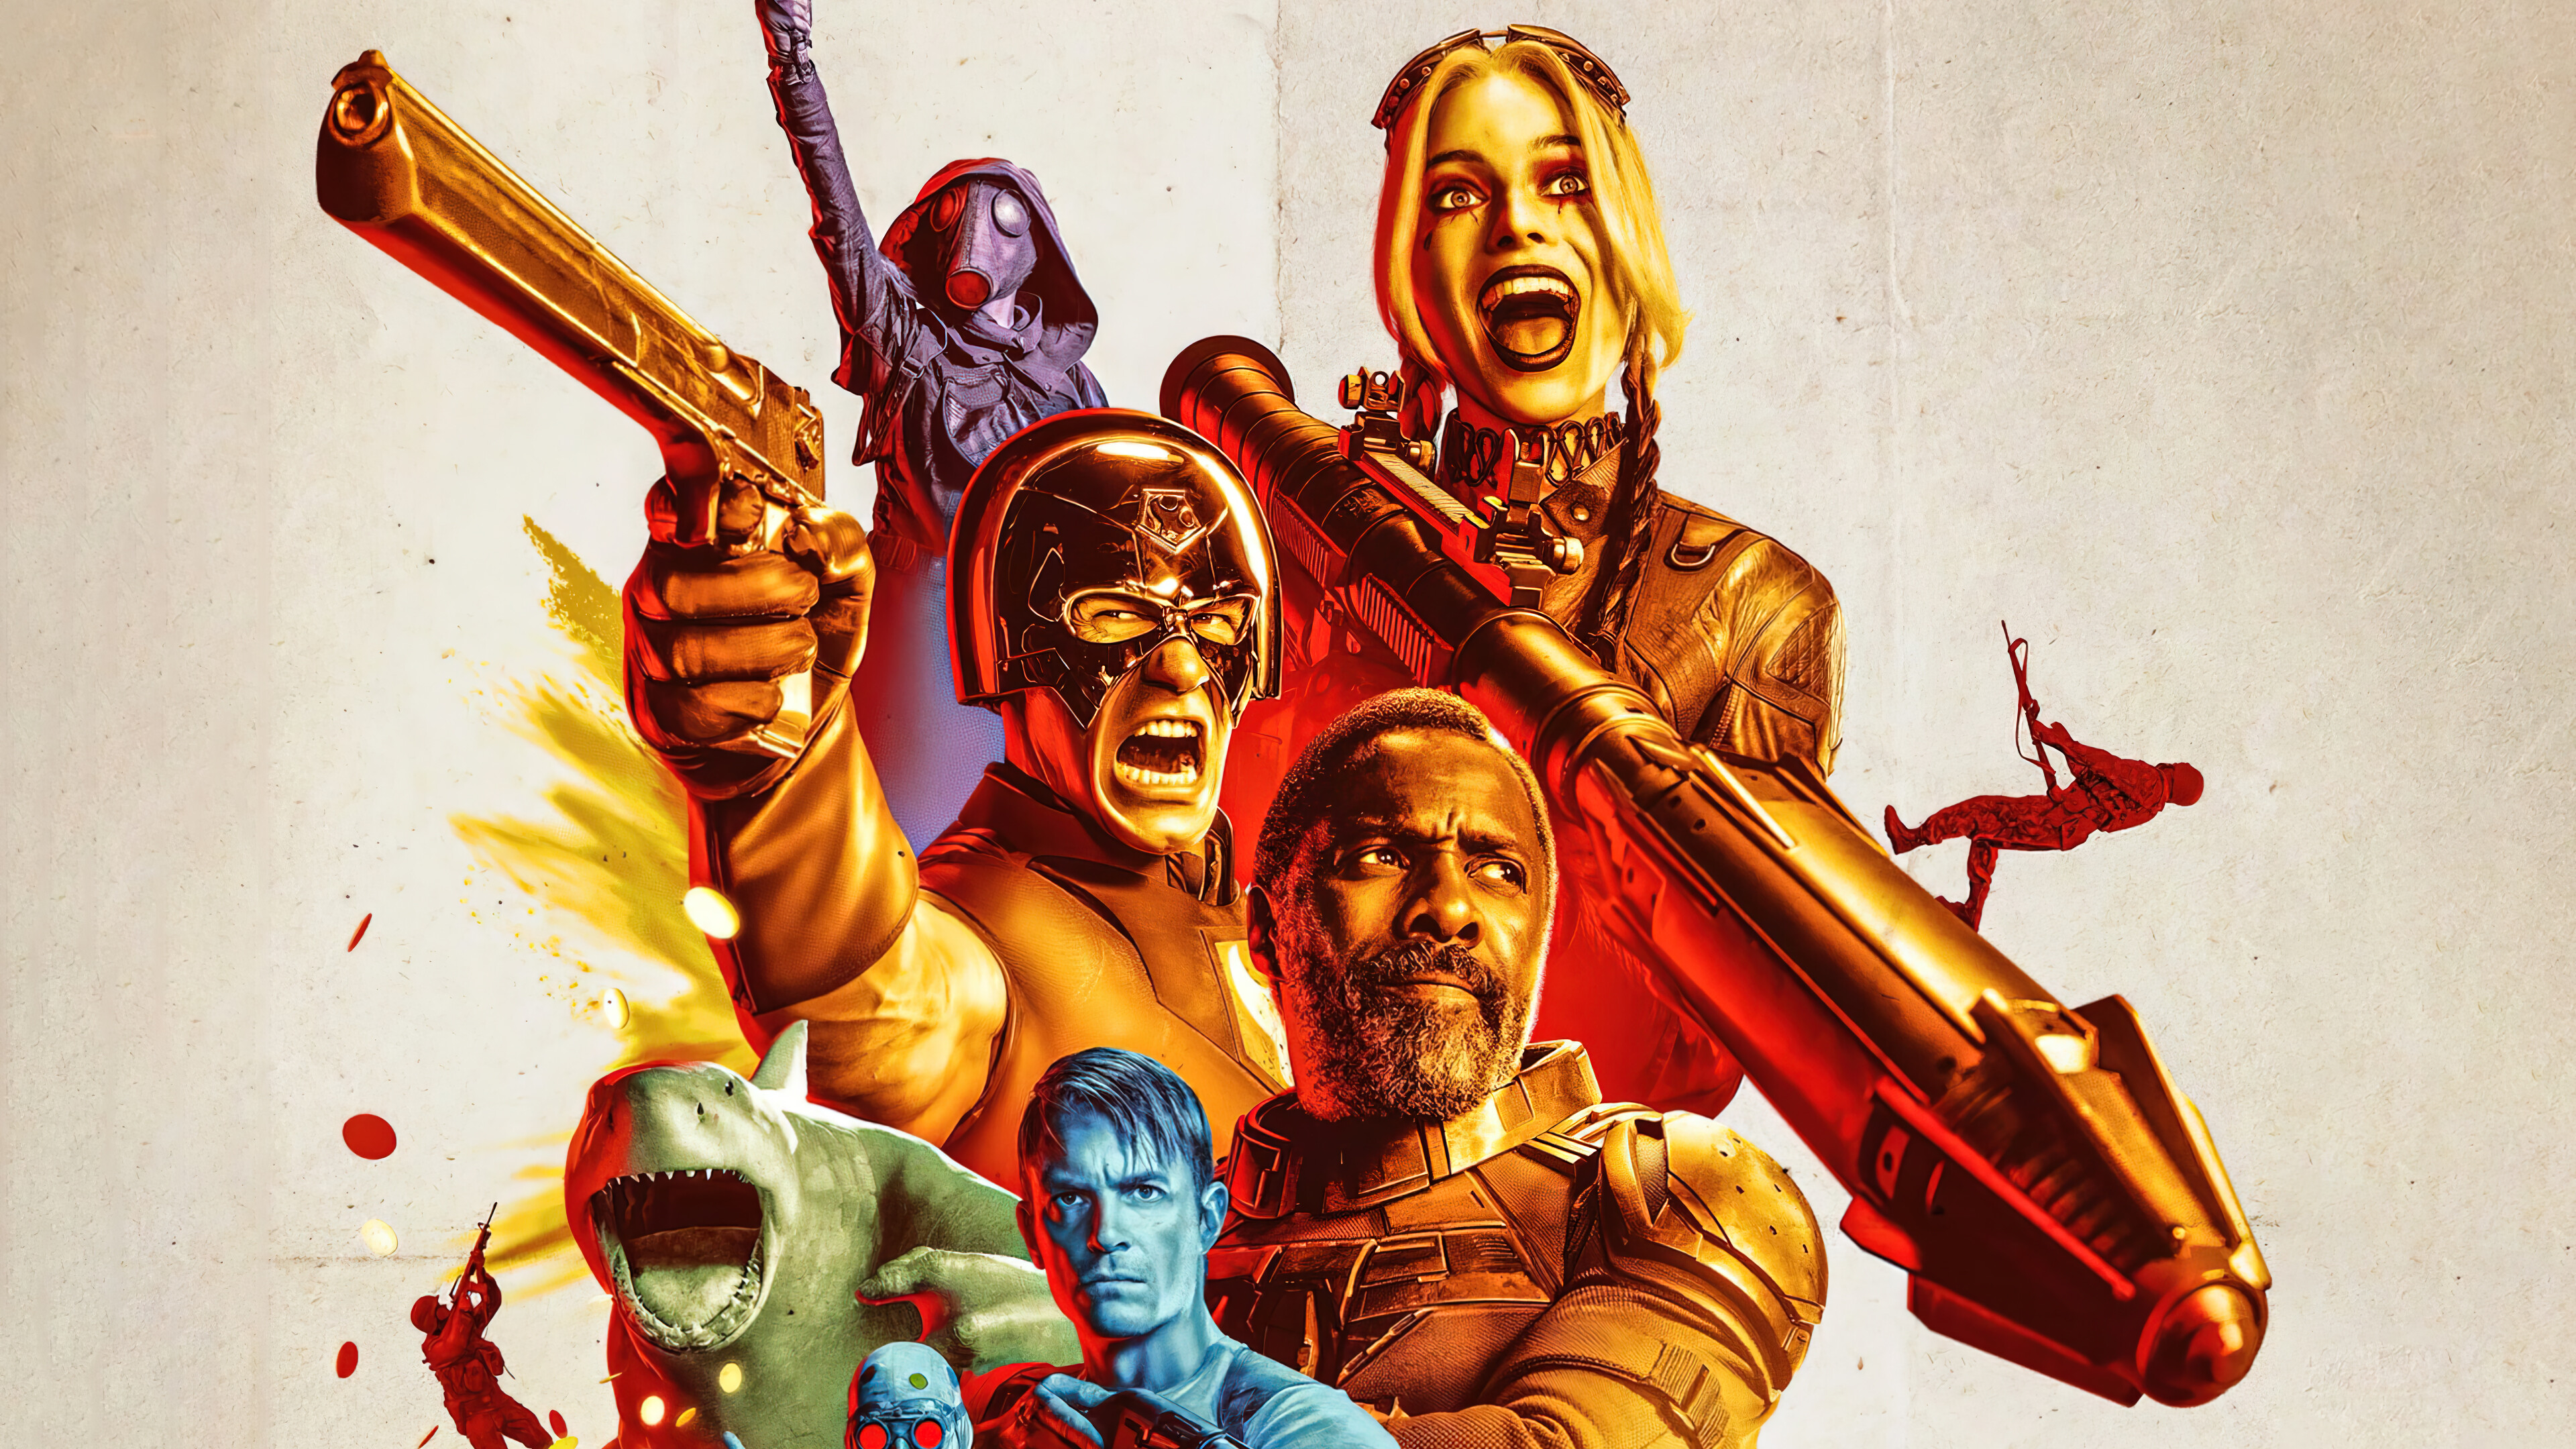 The Suicide Squad 4k Ultra HD Wallpaper